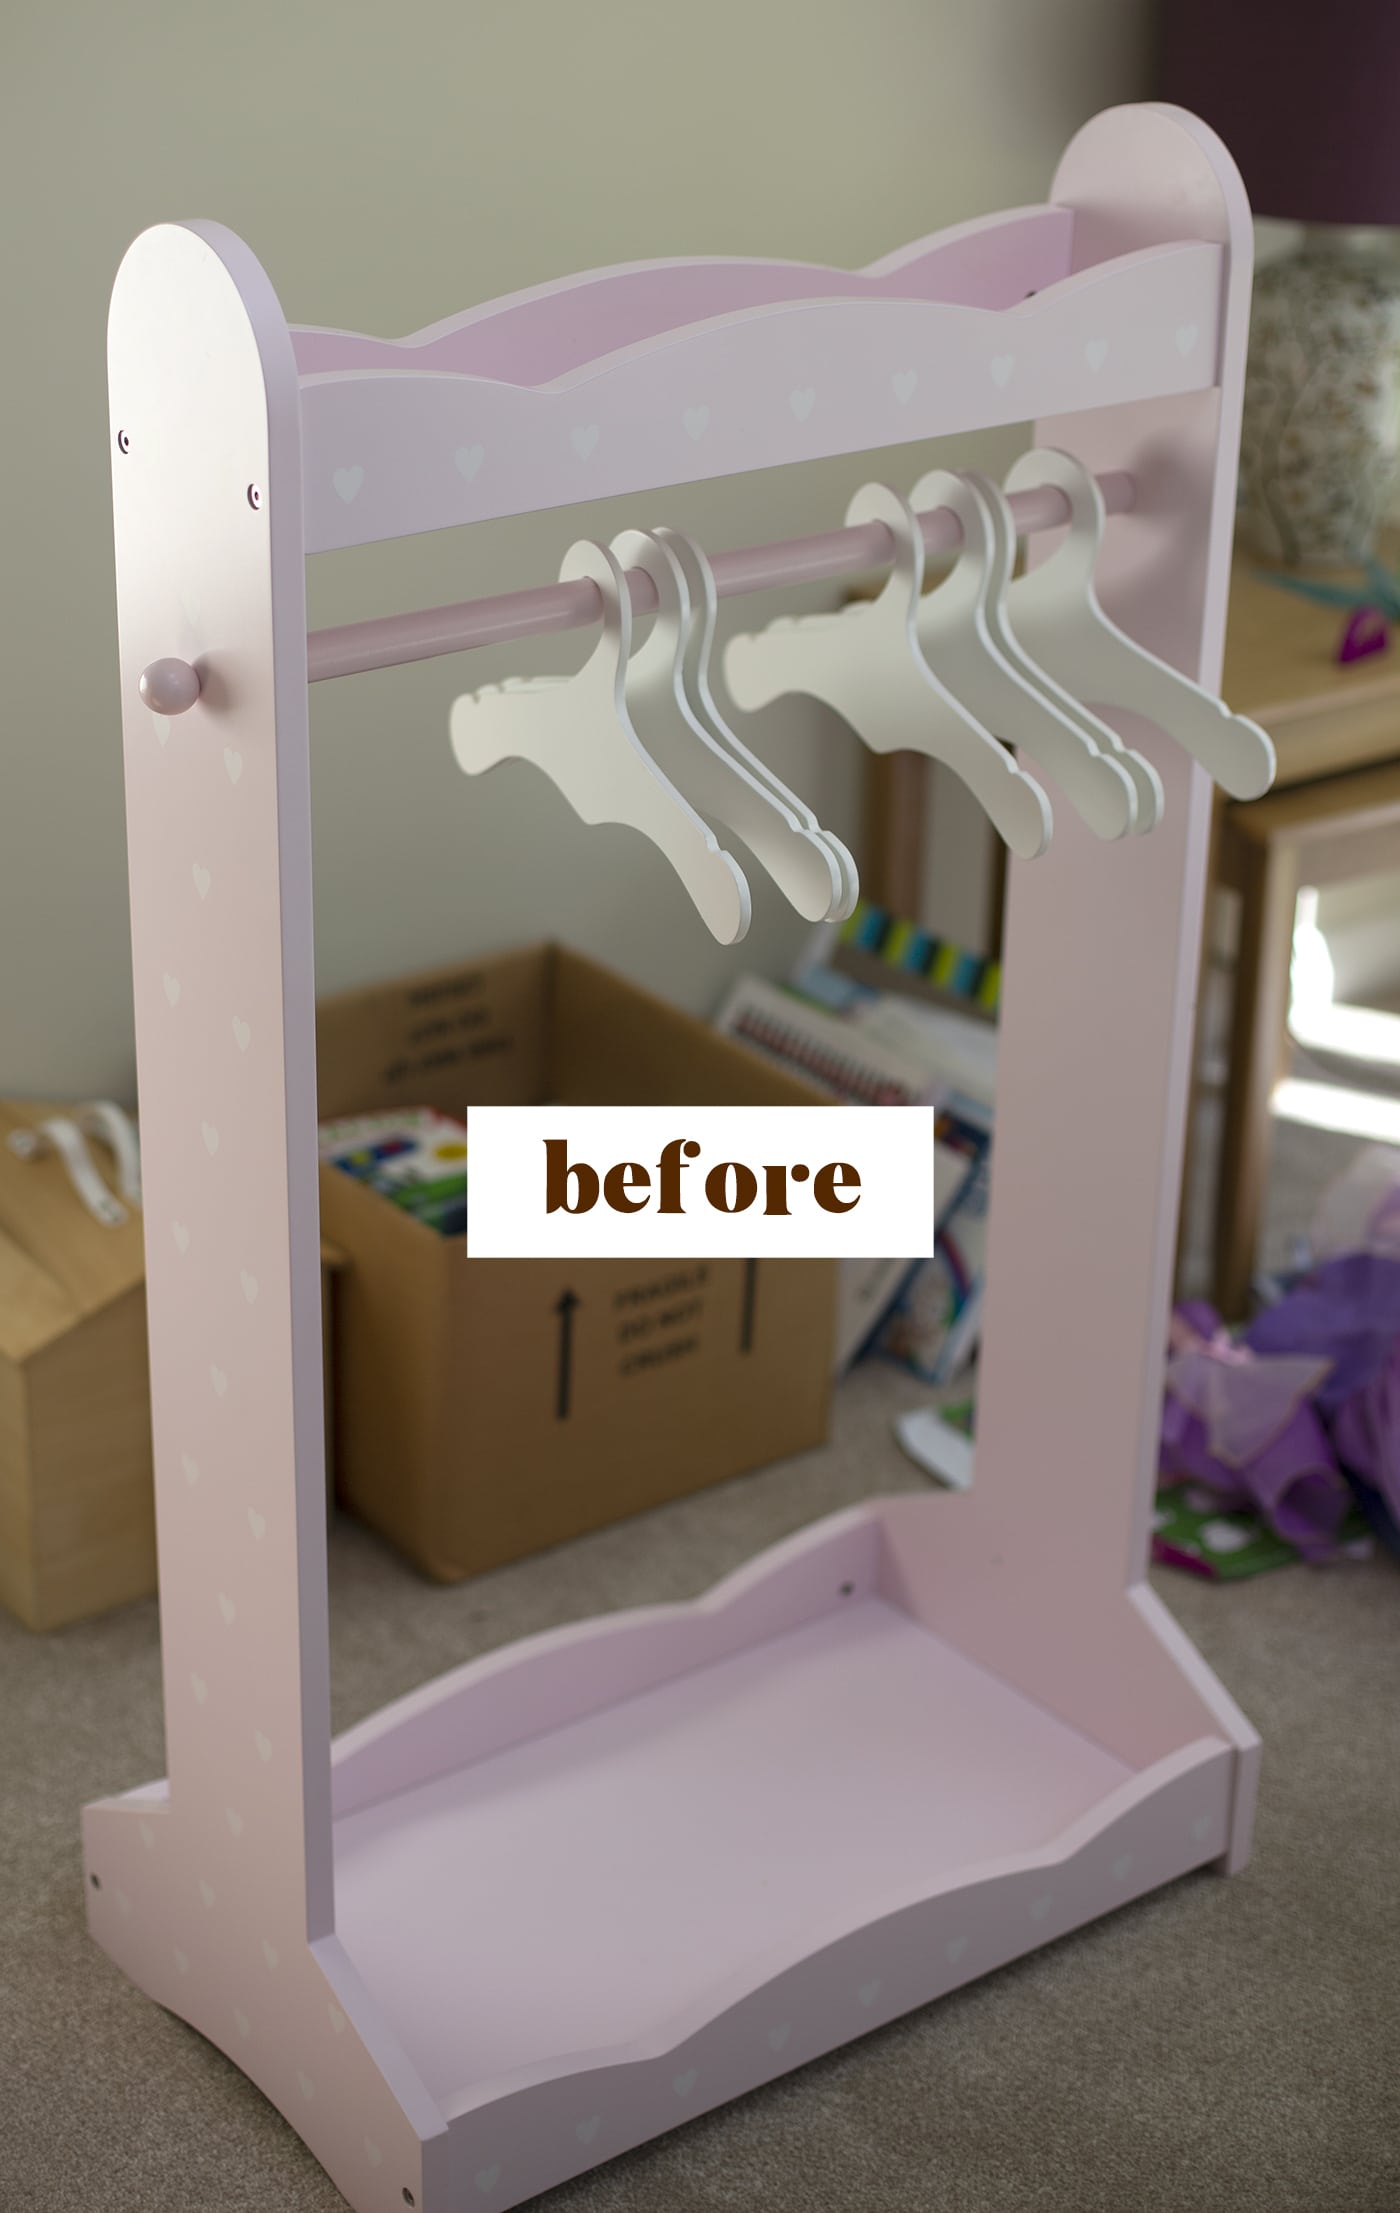 Upcycling Toddler Clothes Hangers - Instructables